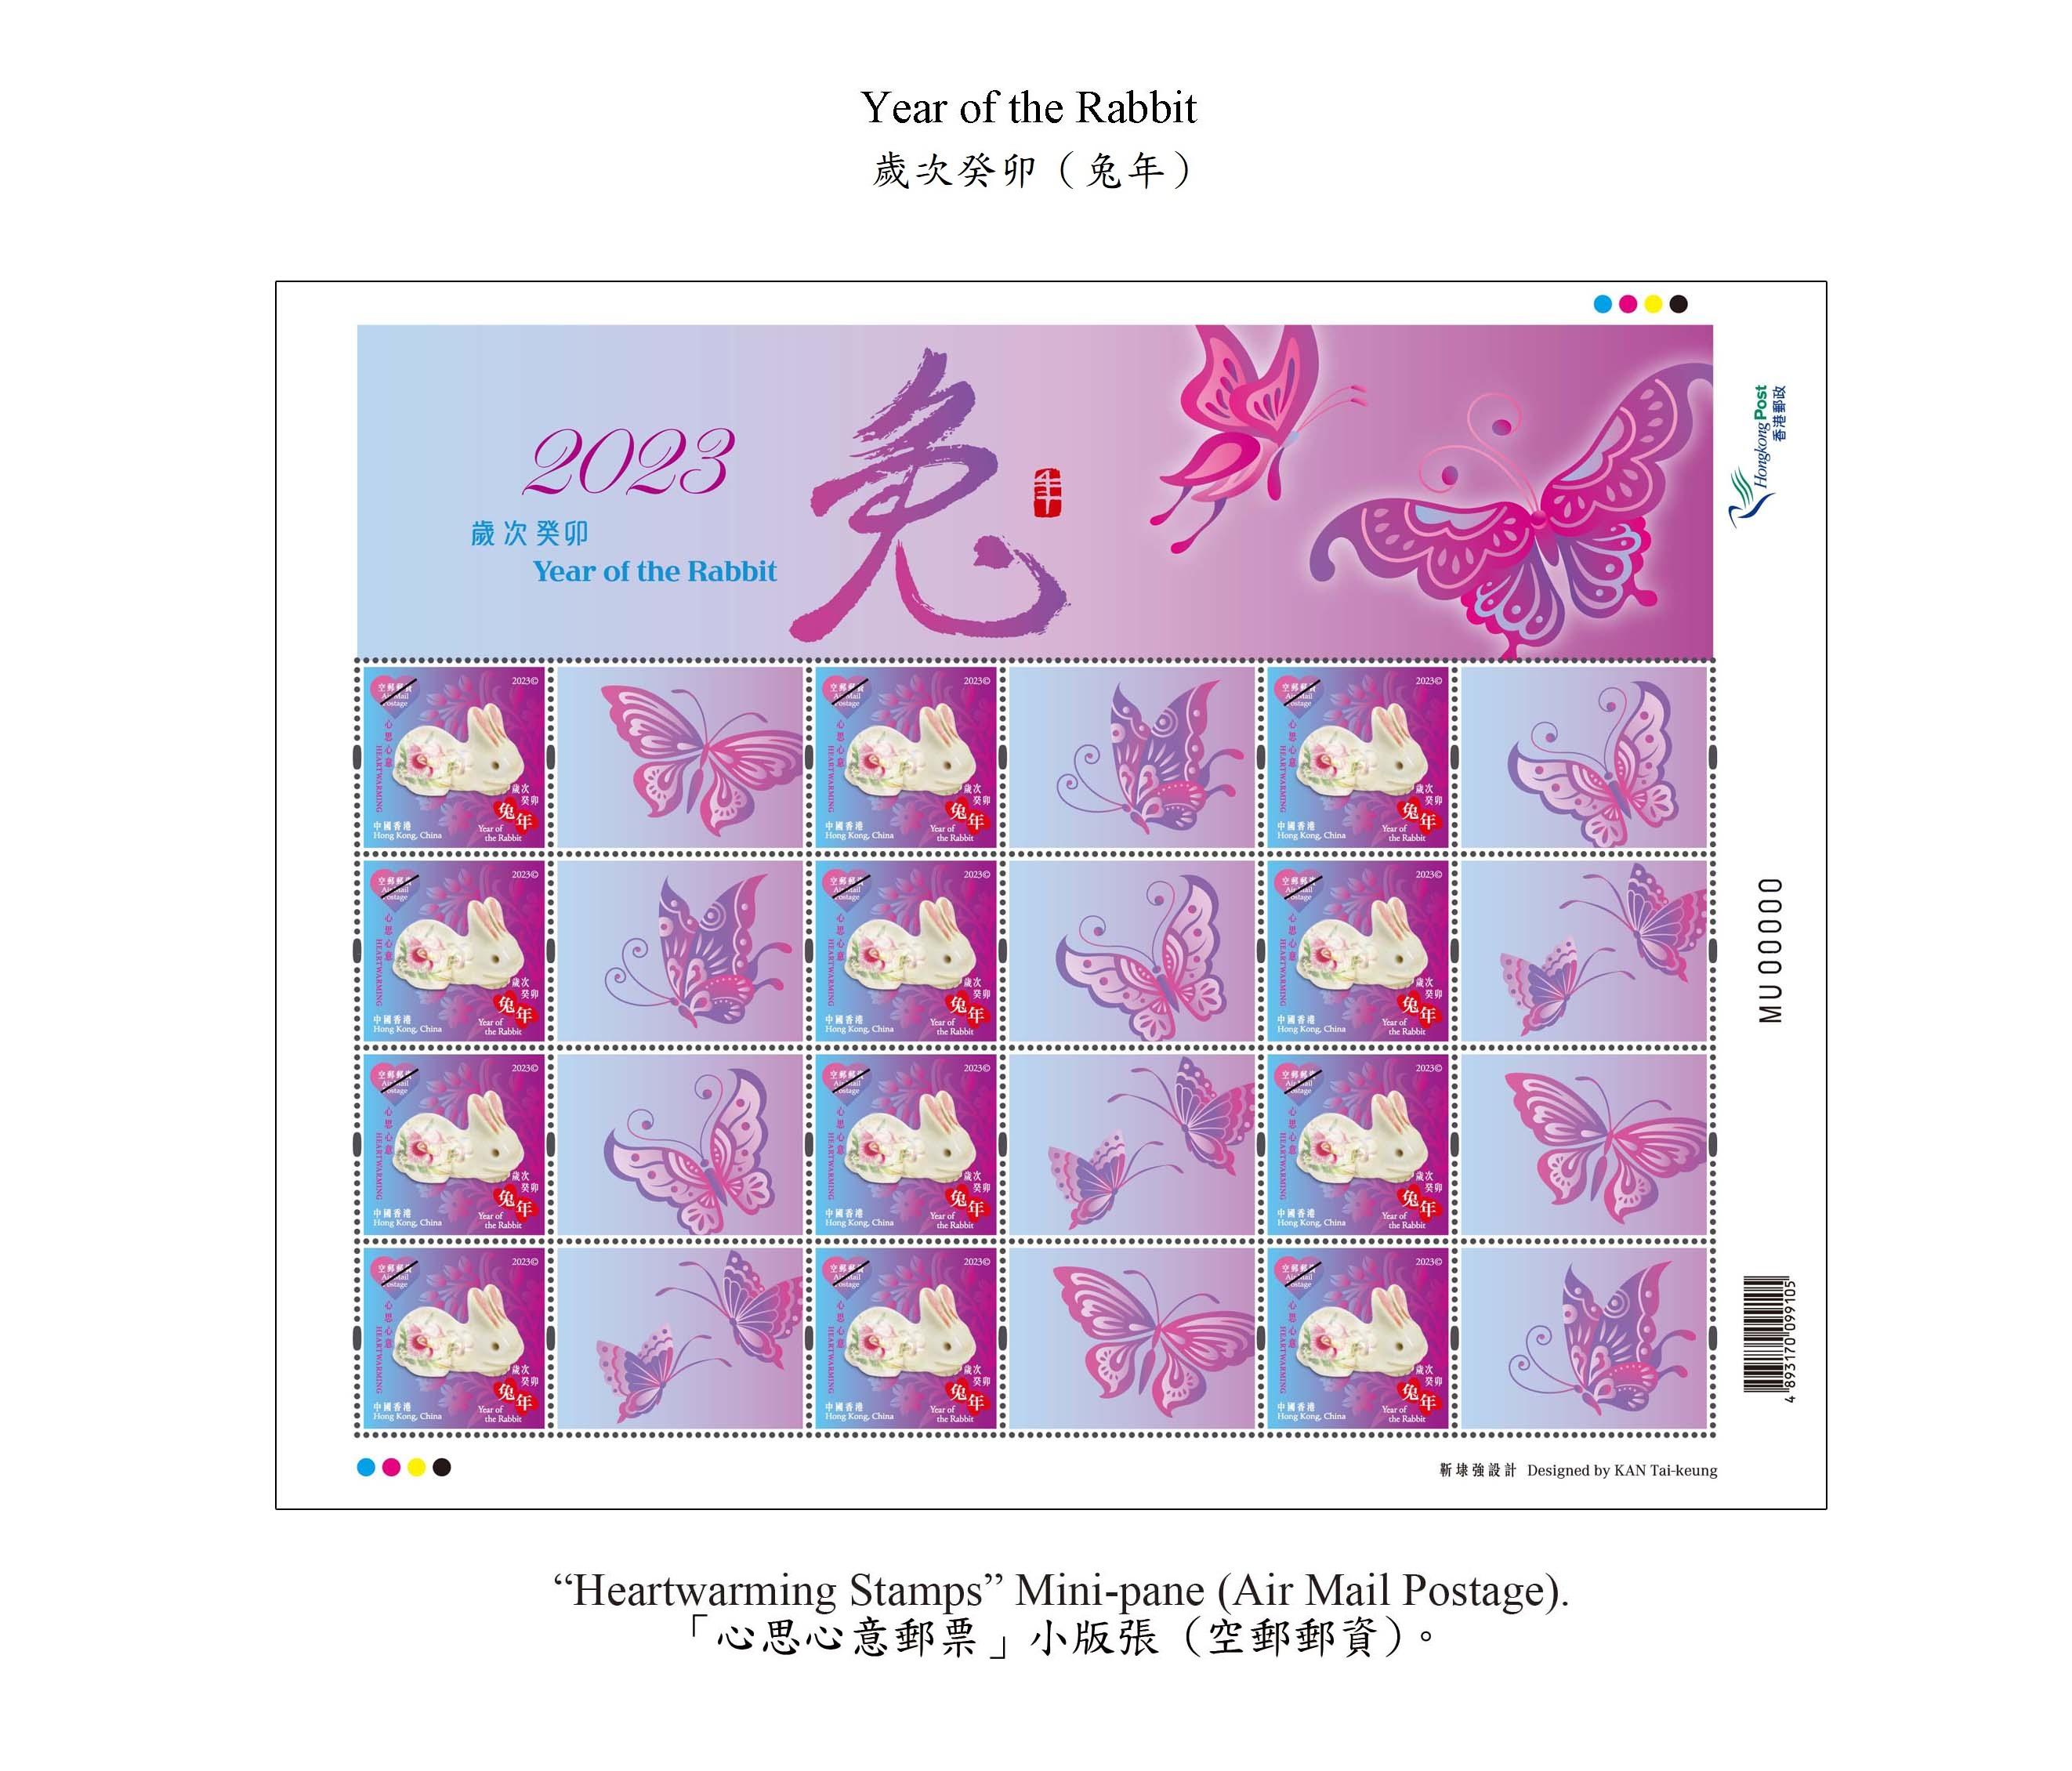 Hongkong Post will launch a special stamp issue and associated philatelic products with the theme "Year of the Rabbit" on January 10, 2023 (Tuesday). Photo shows the "Heartwarming Stamps" mini-pane (air mail postage).
